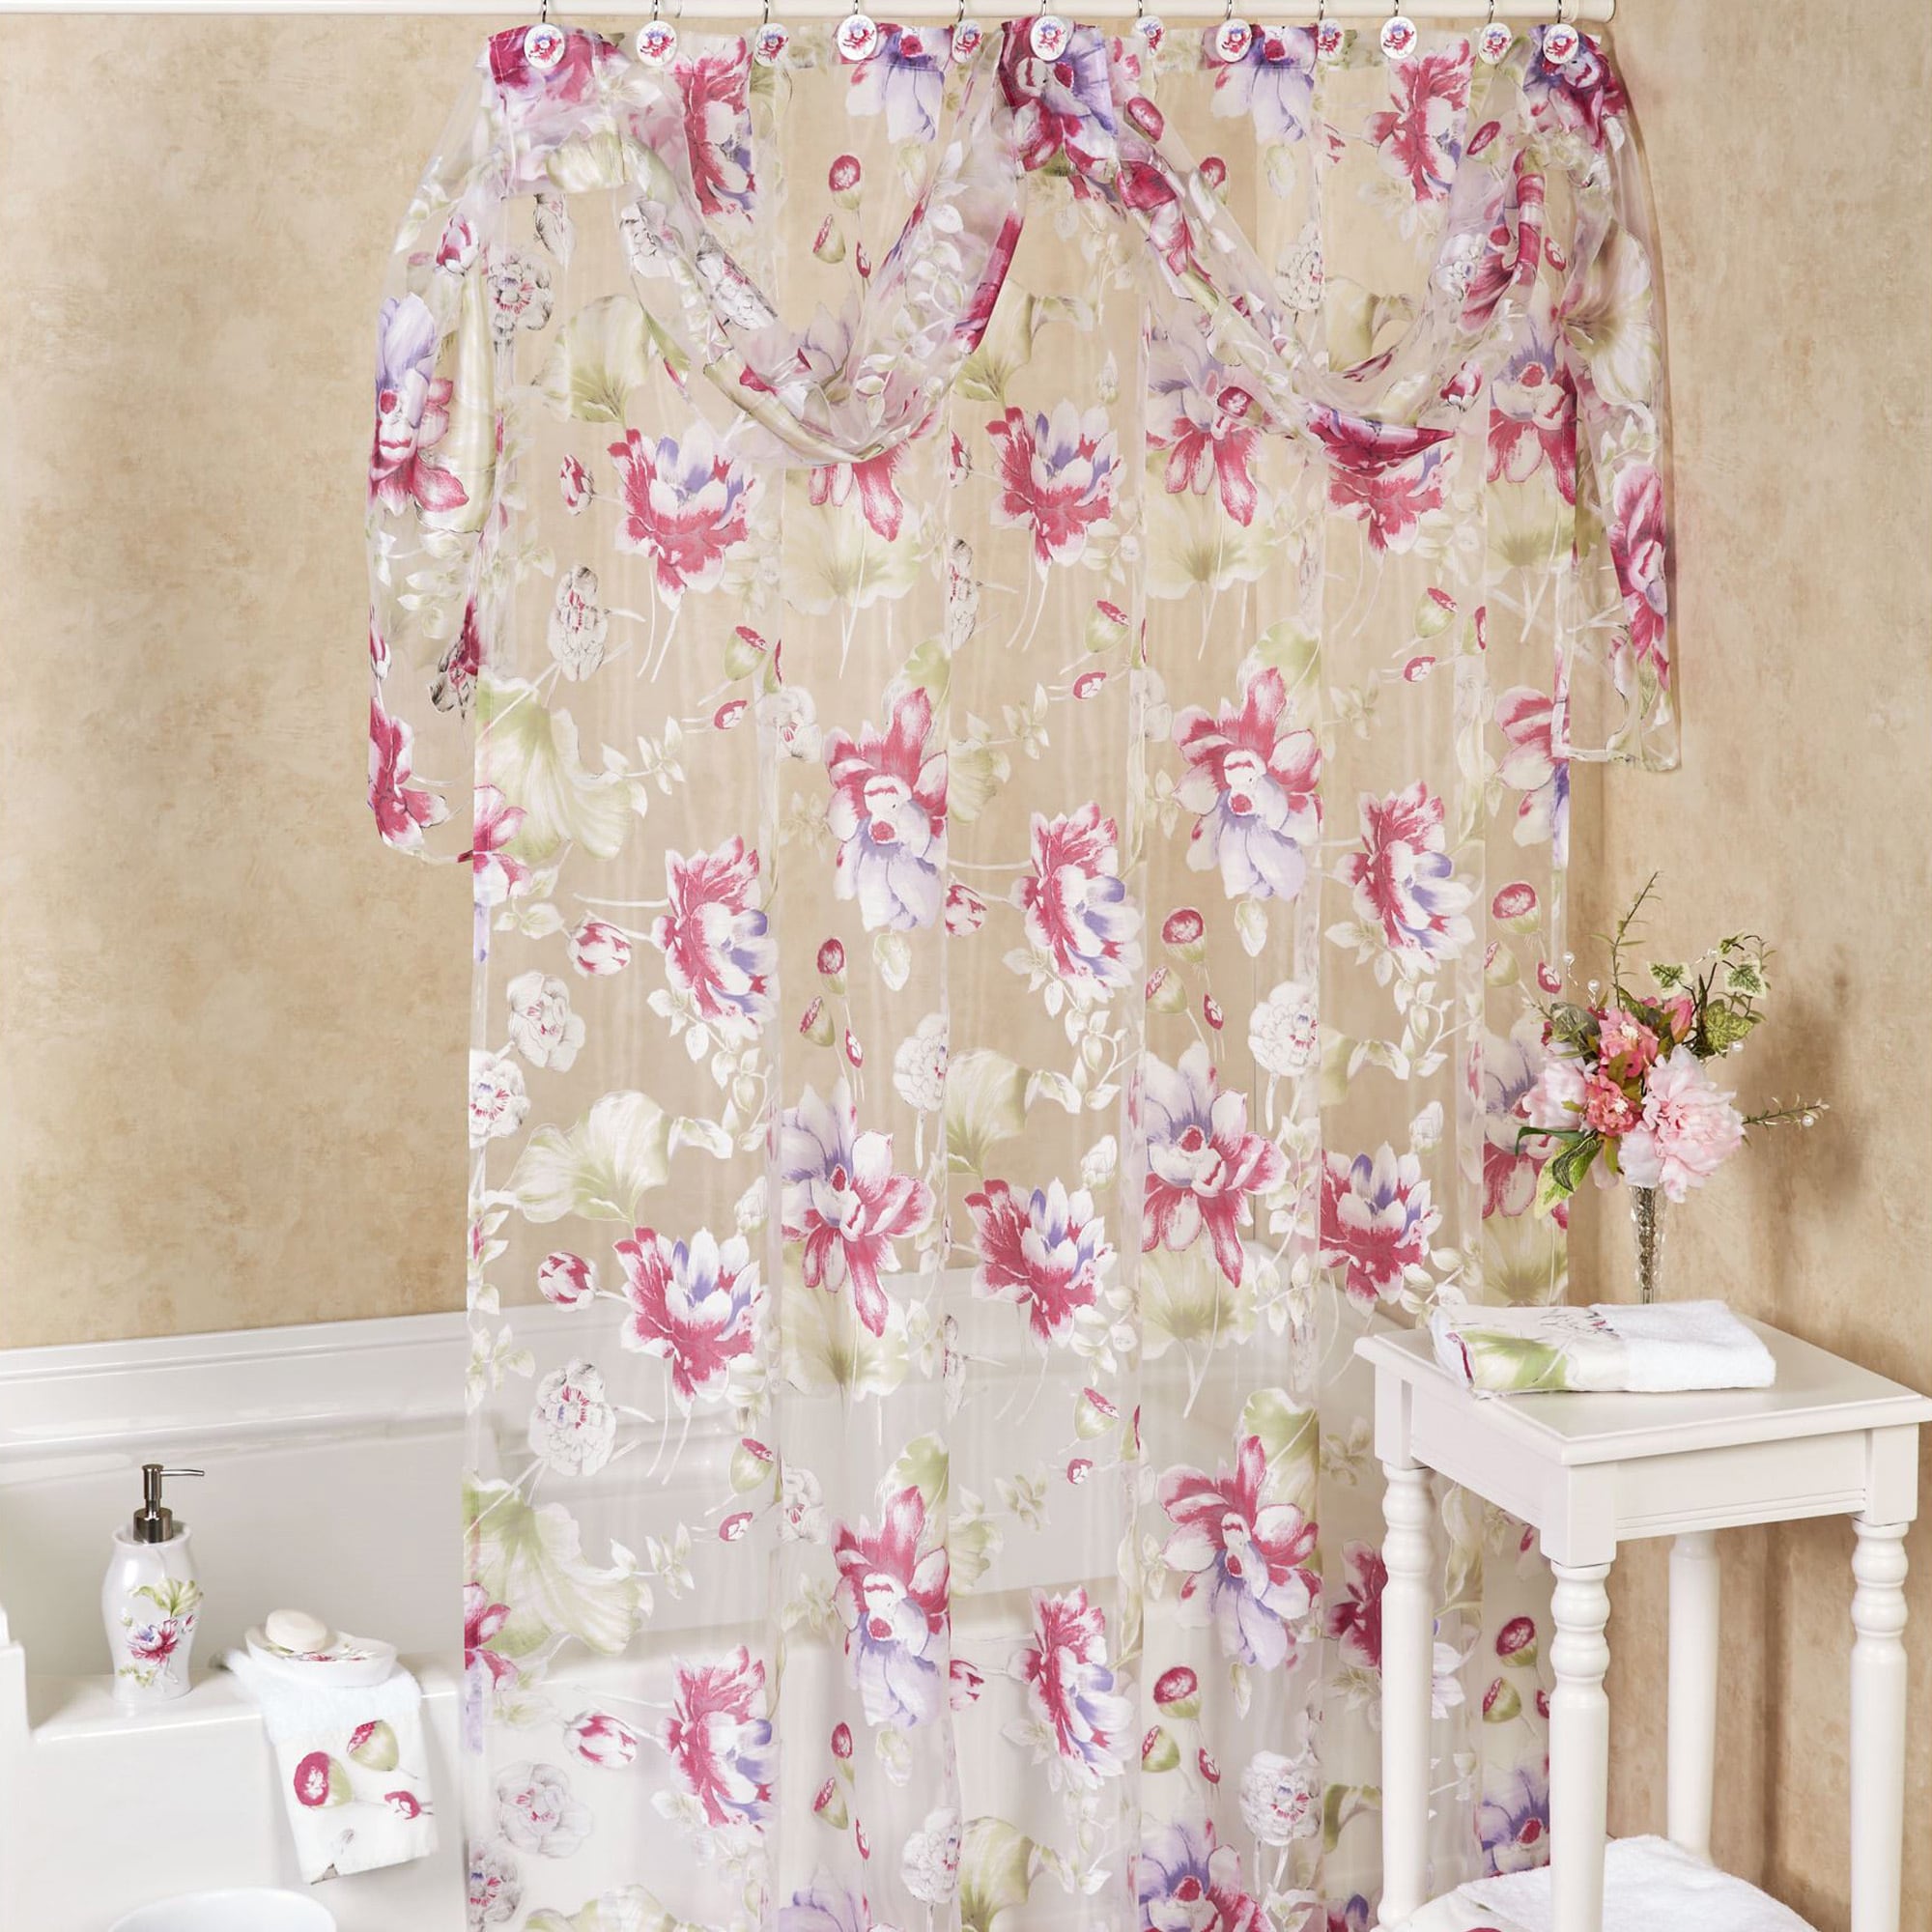 Melarosa Pink High Quality Scarf Sheer Shower Curtain Made 100% polyester. 